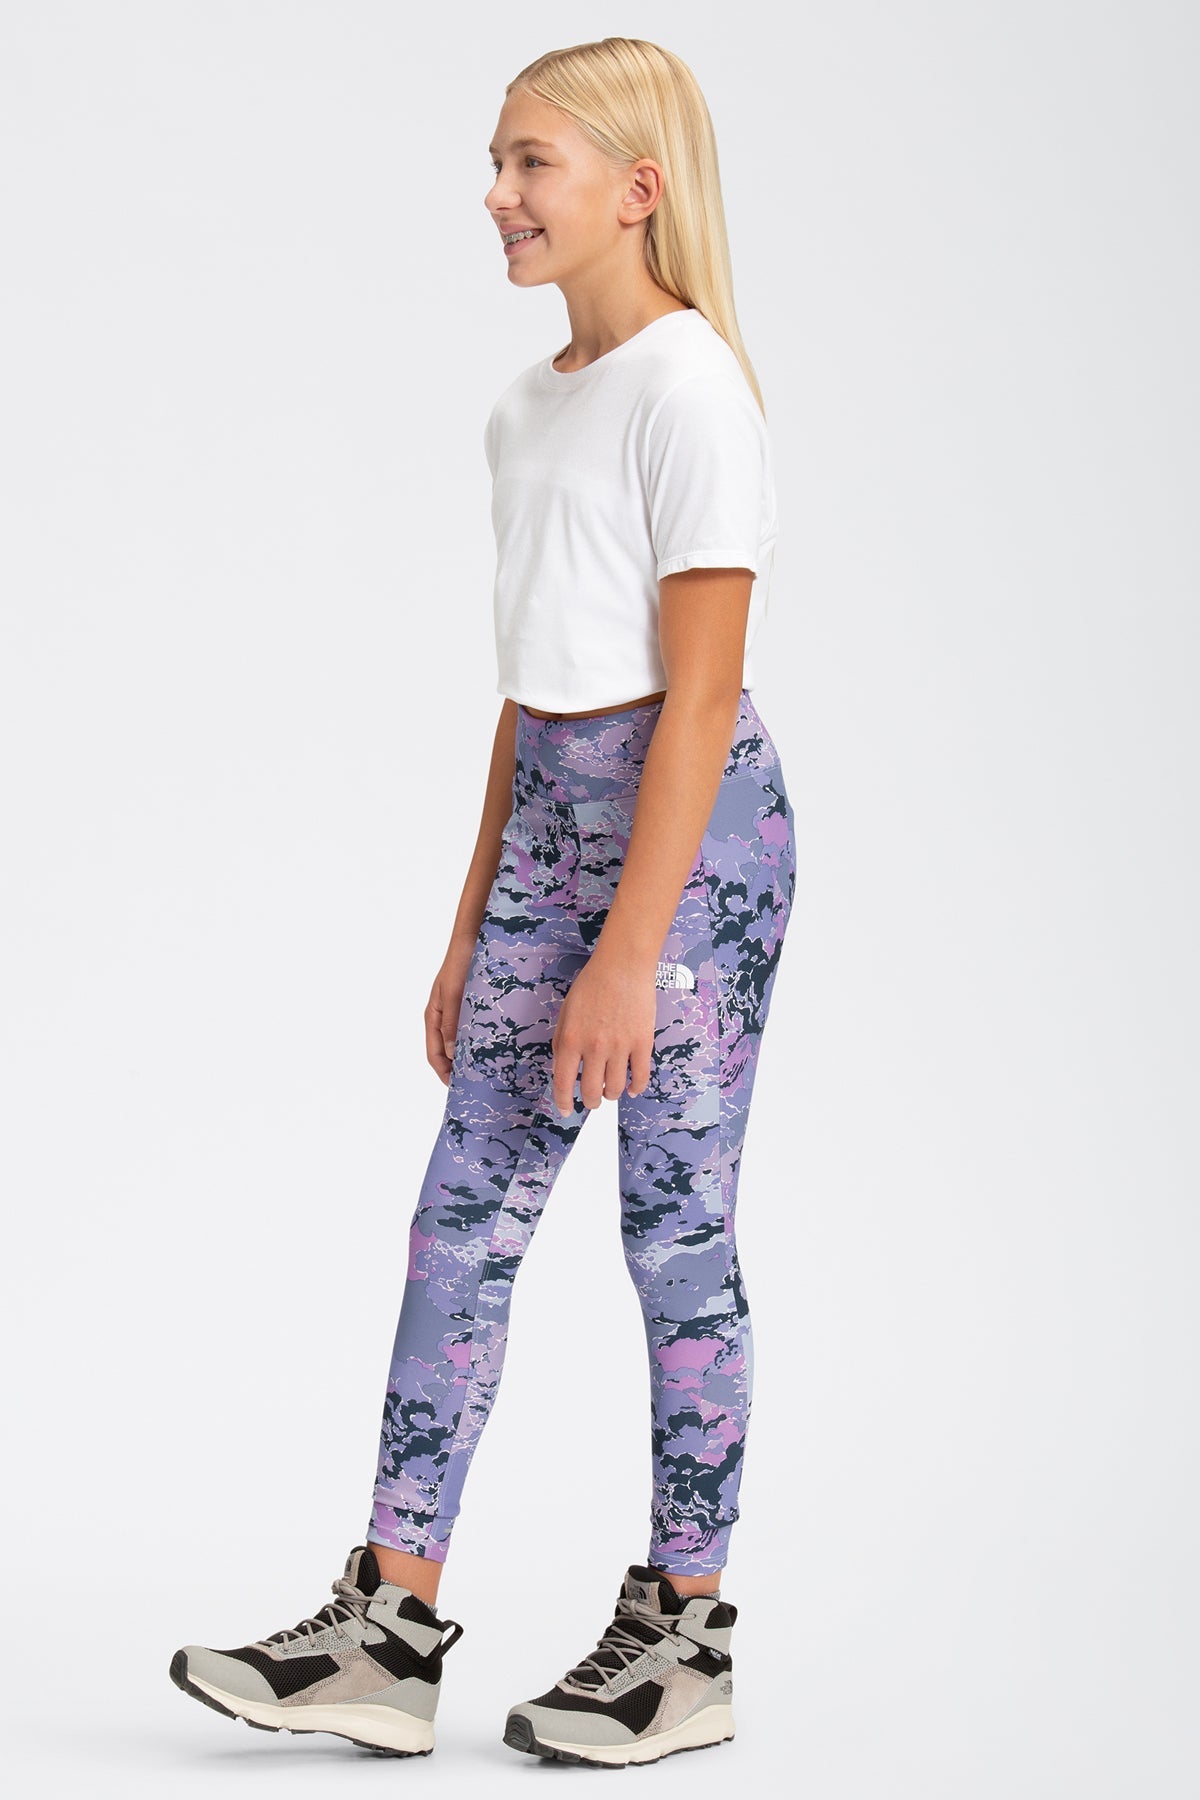 North Face On Mountain Girls Leggings - Sweet Lavender Camo